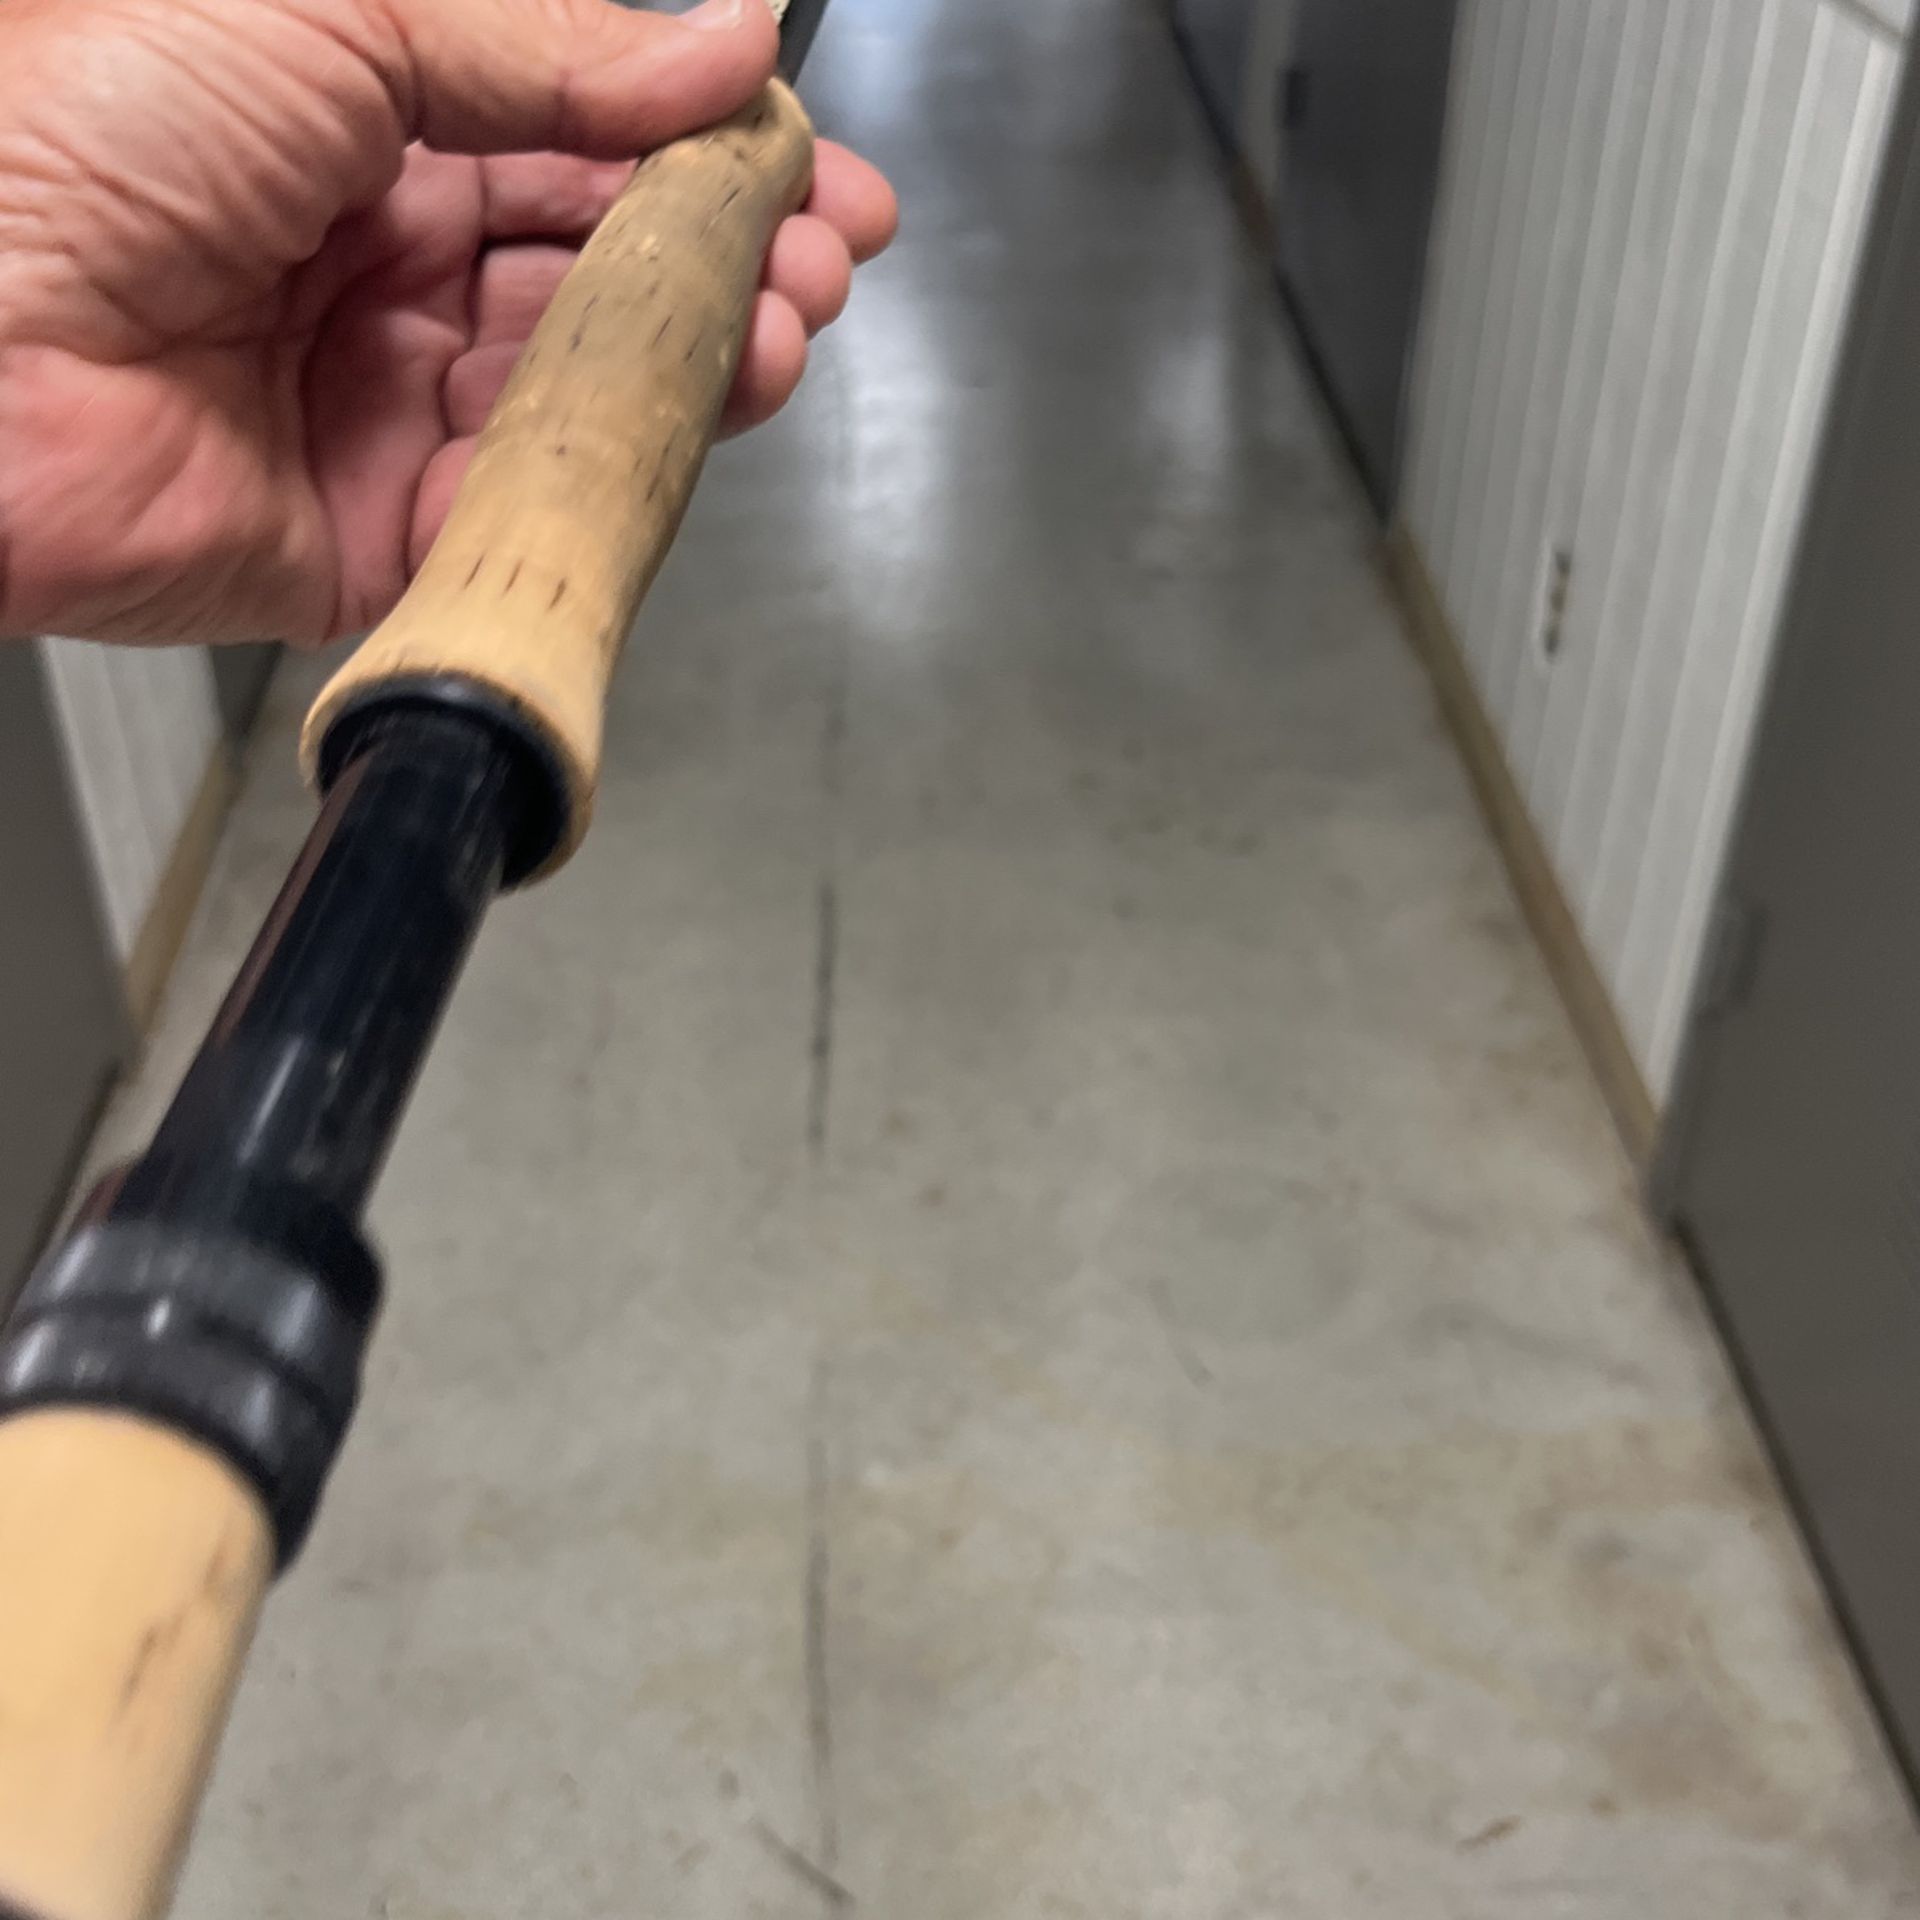 Sage 10 Ft. Fly Rod With Ross Canyon Reel for Sale in Delray Beach